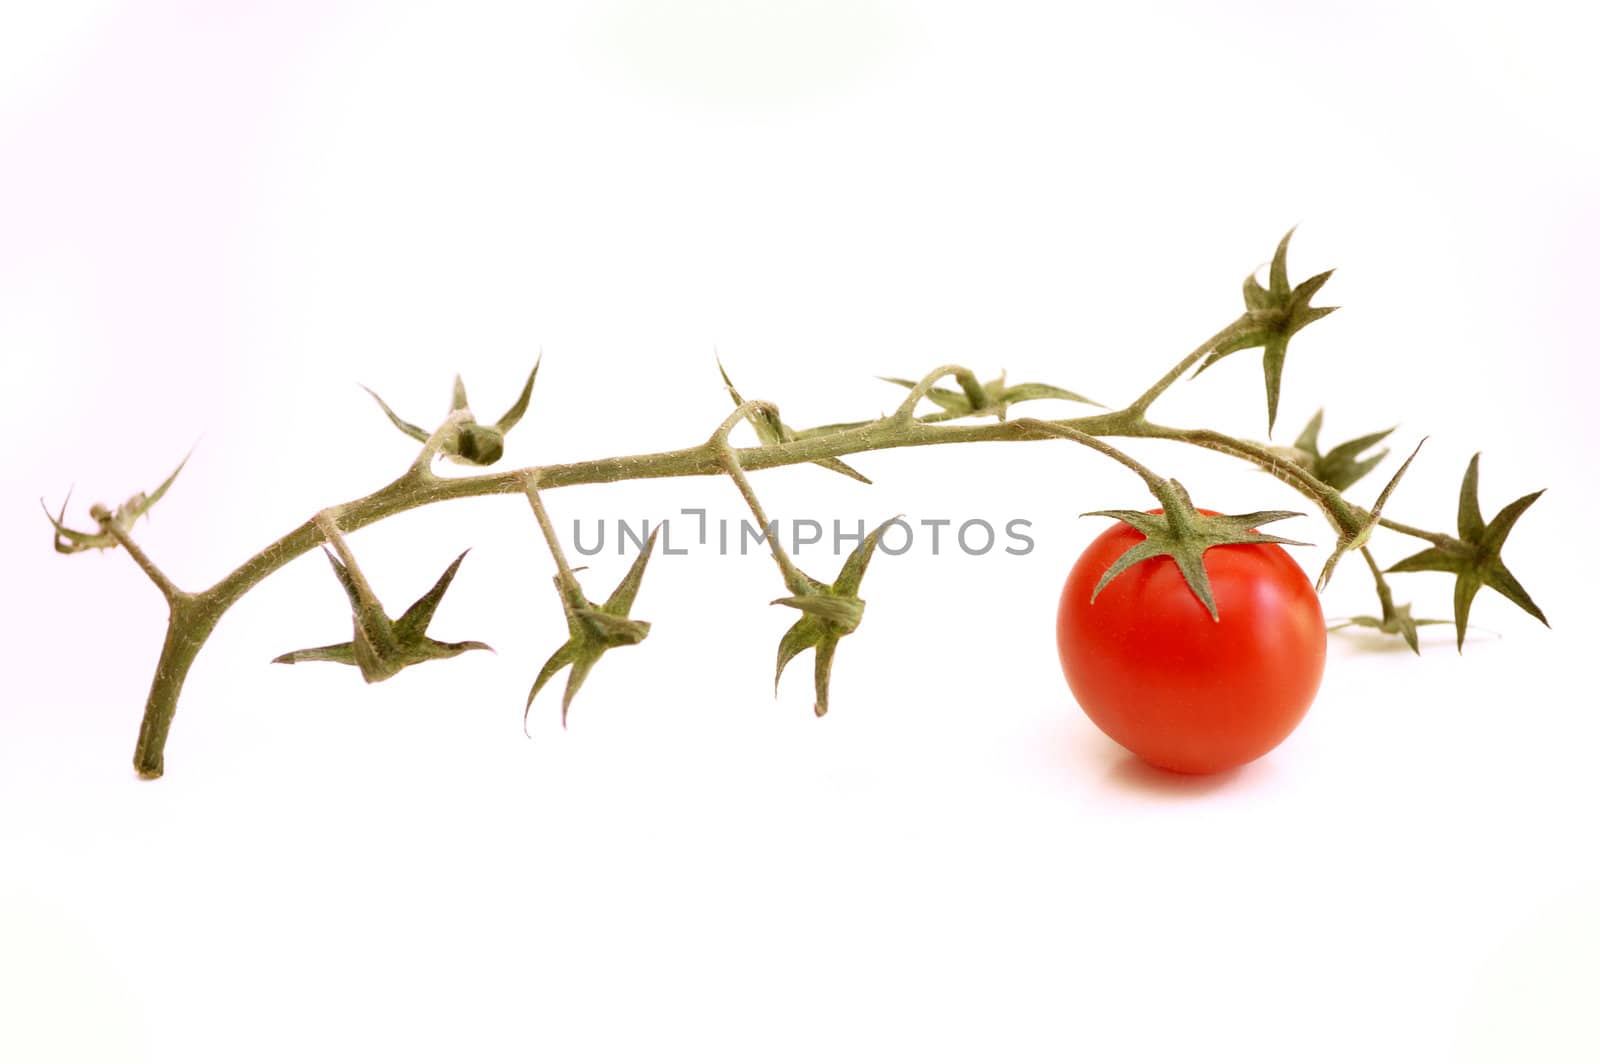 last tomato of a bunch, over white background.